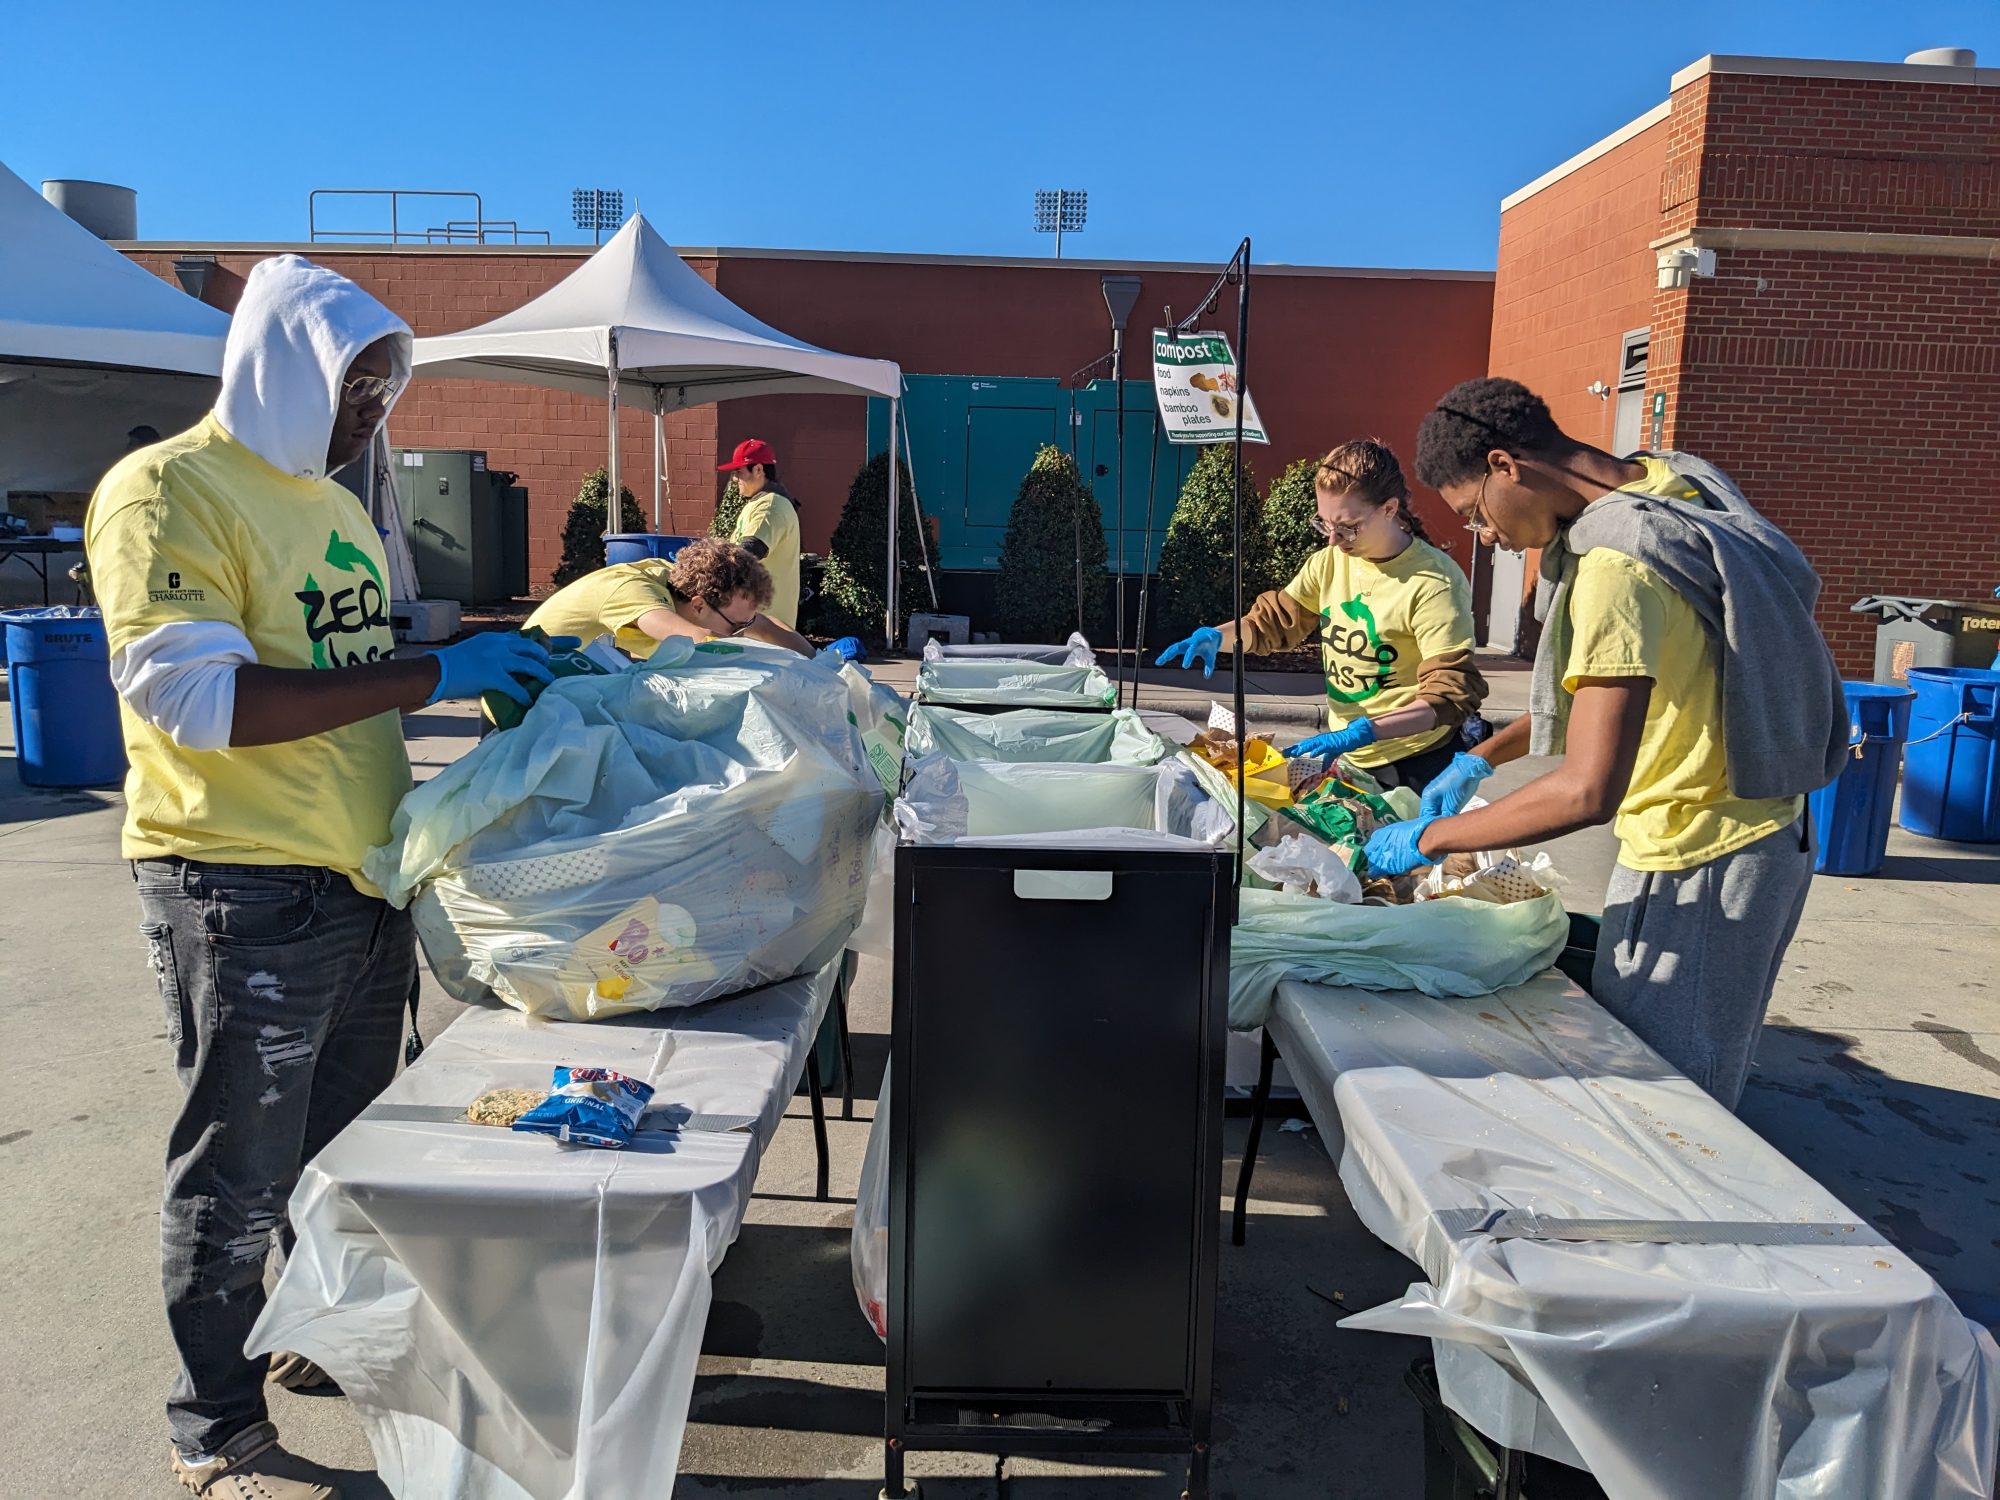 Zero waste volunteers sort through recycling at a football game.